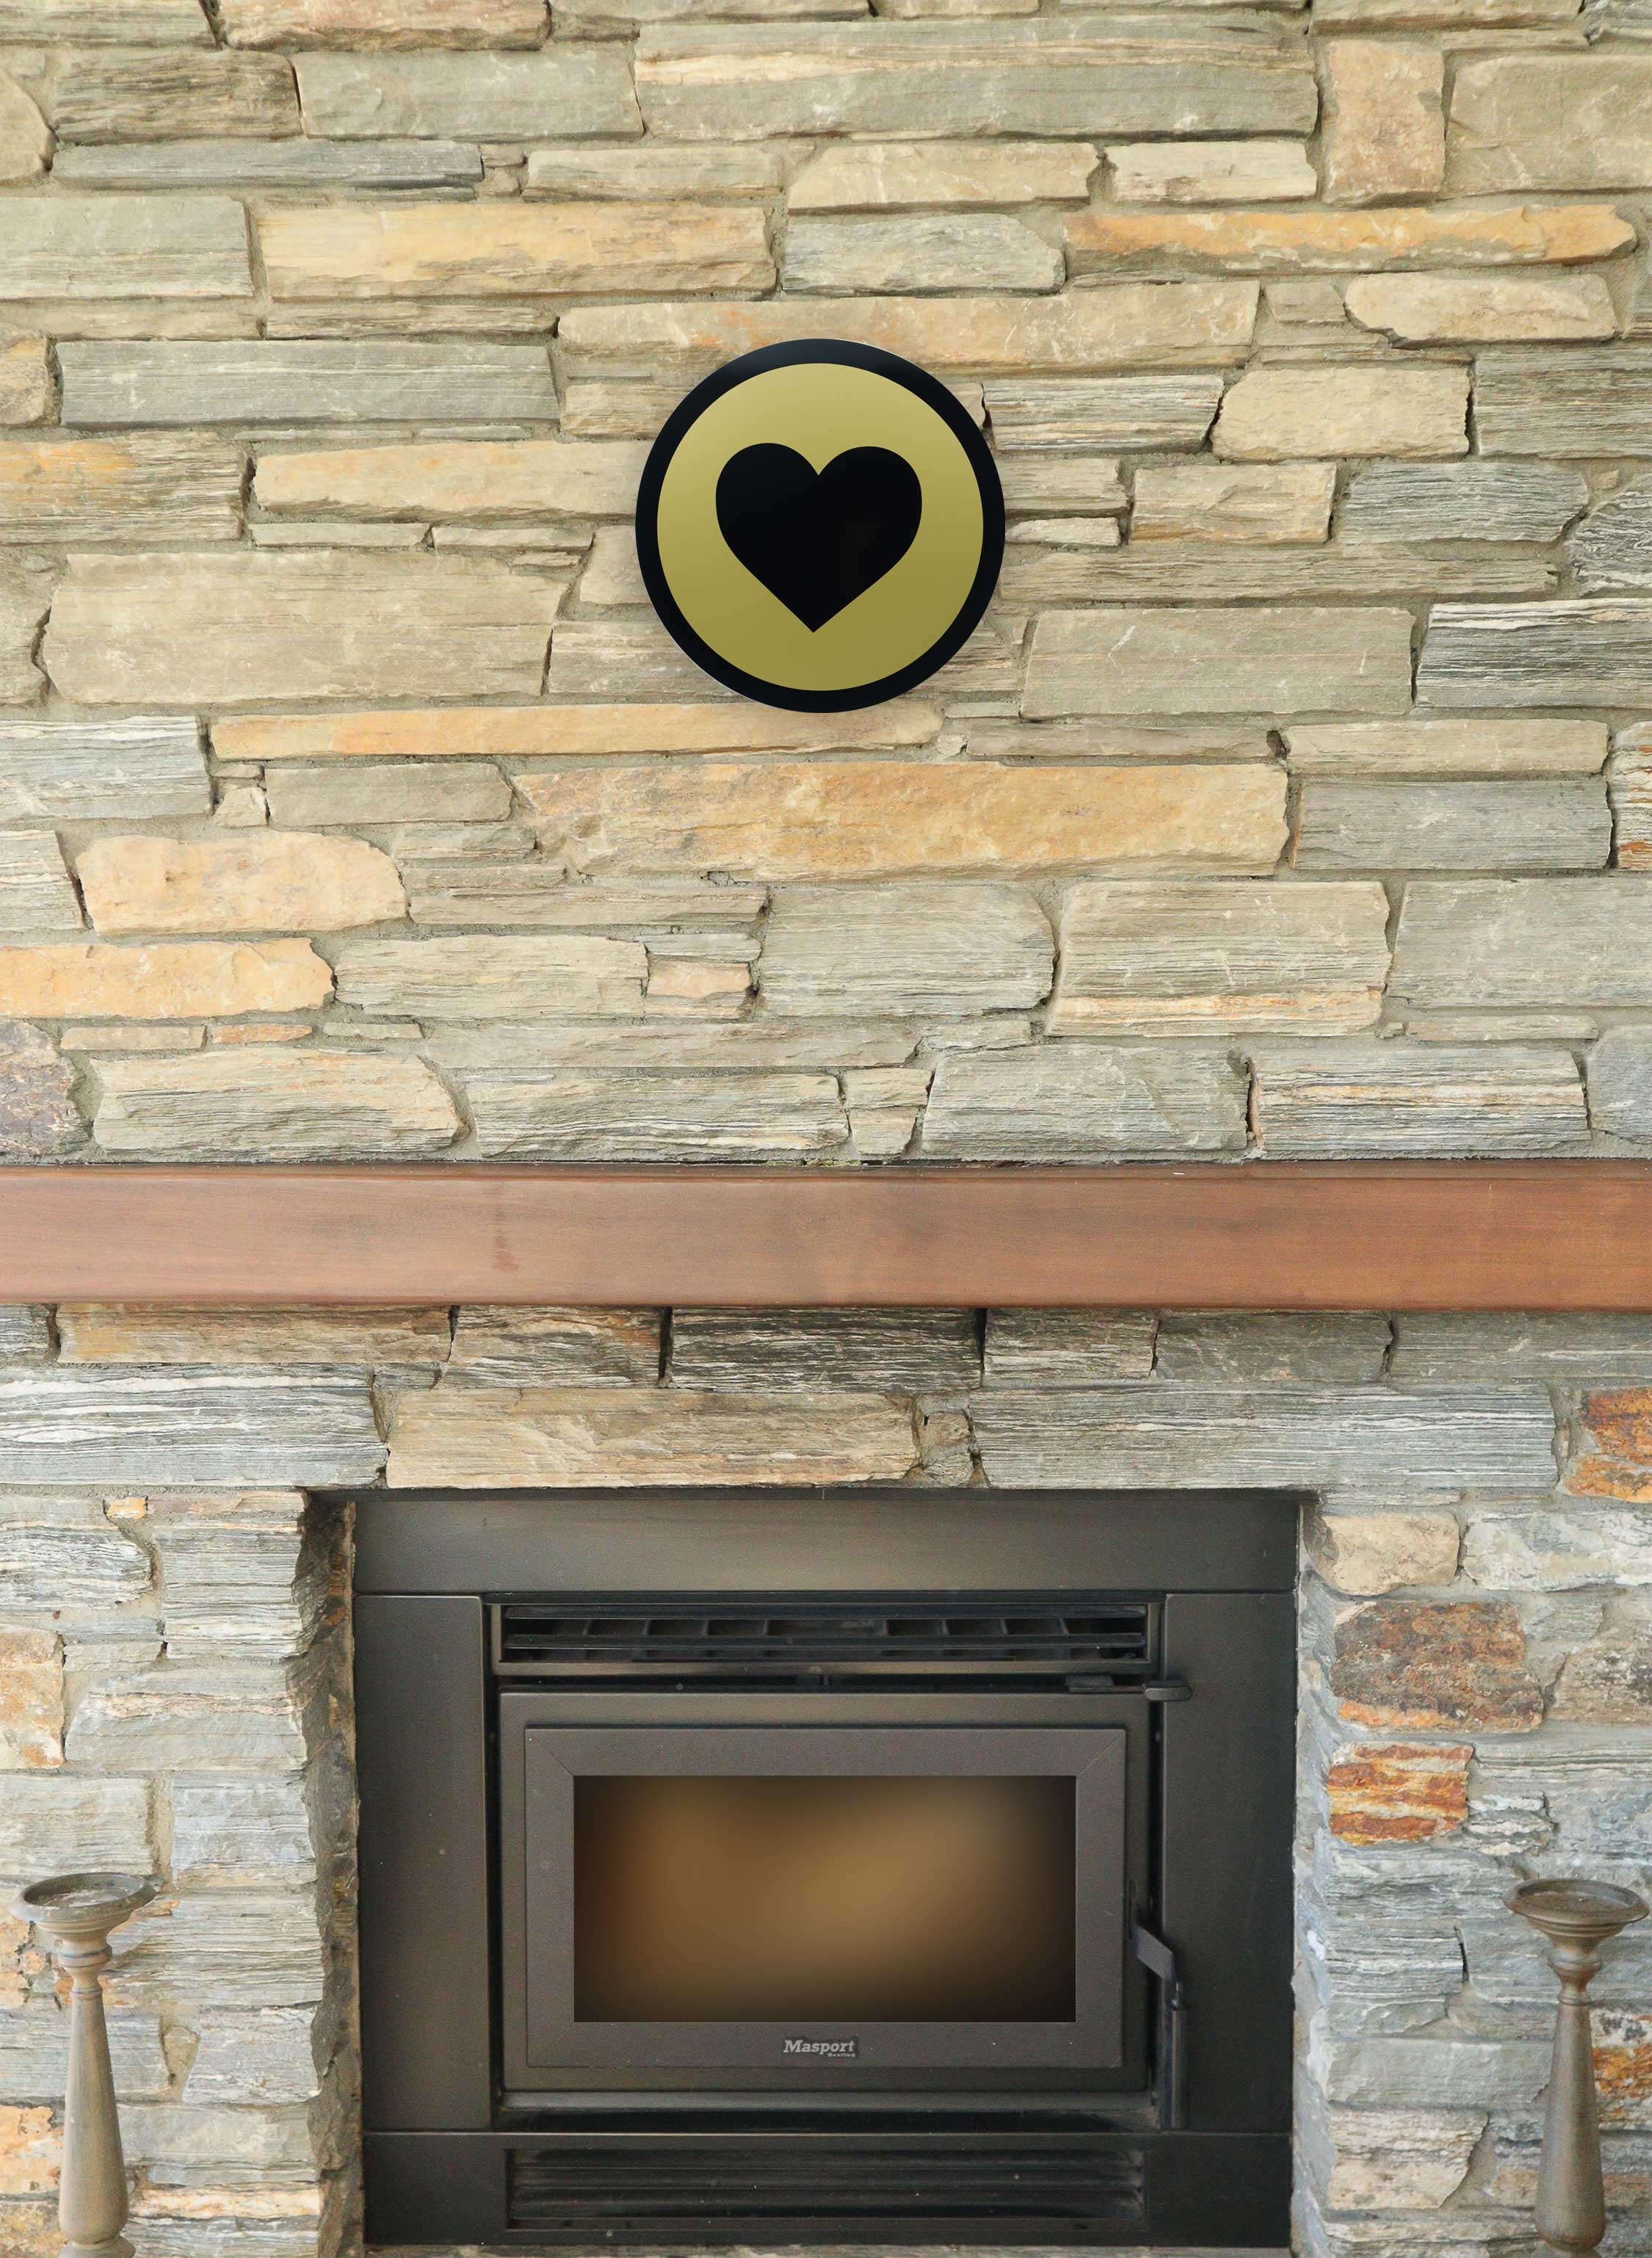 Round Heart Black on Gold Sign